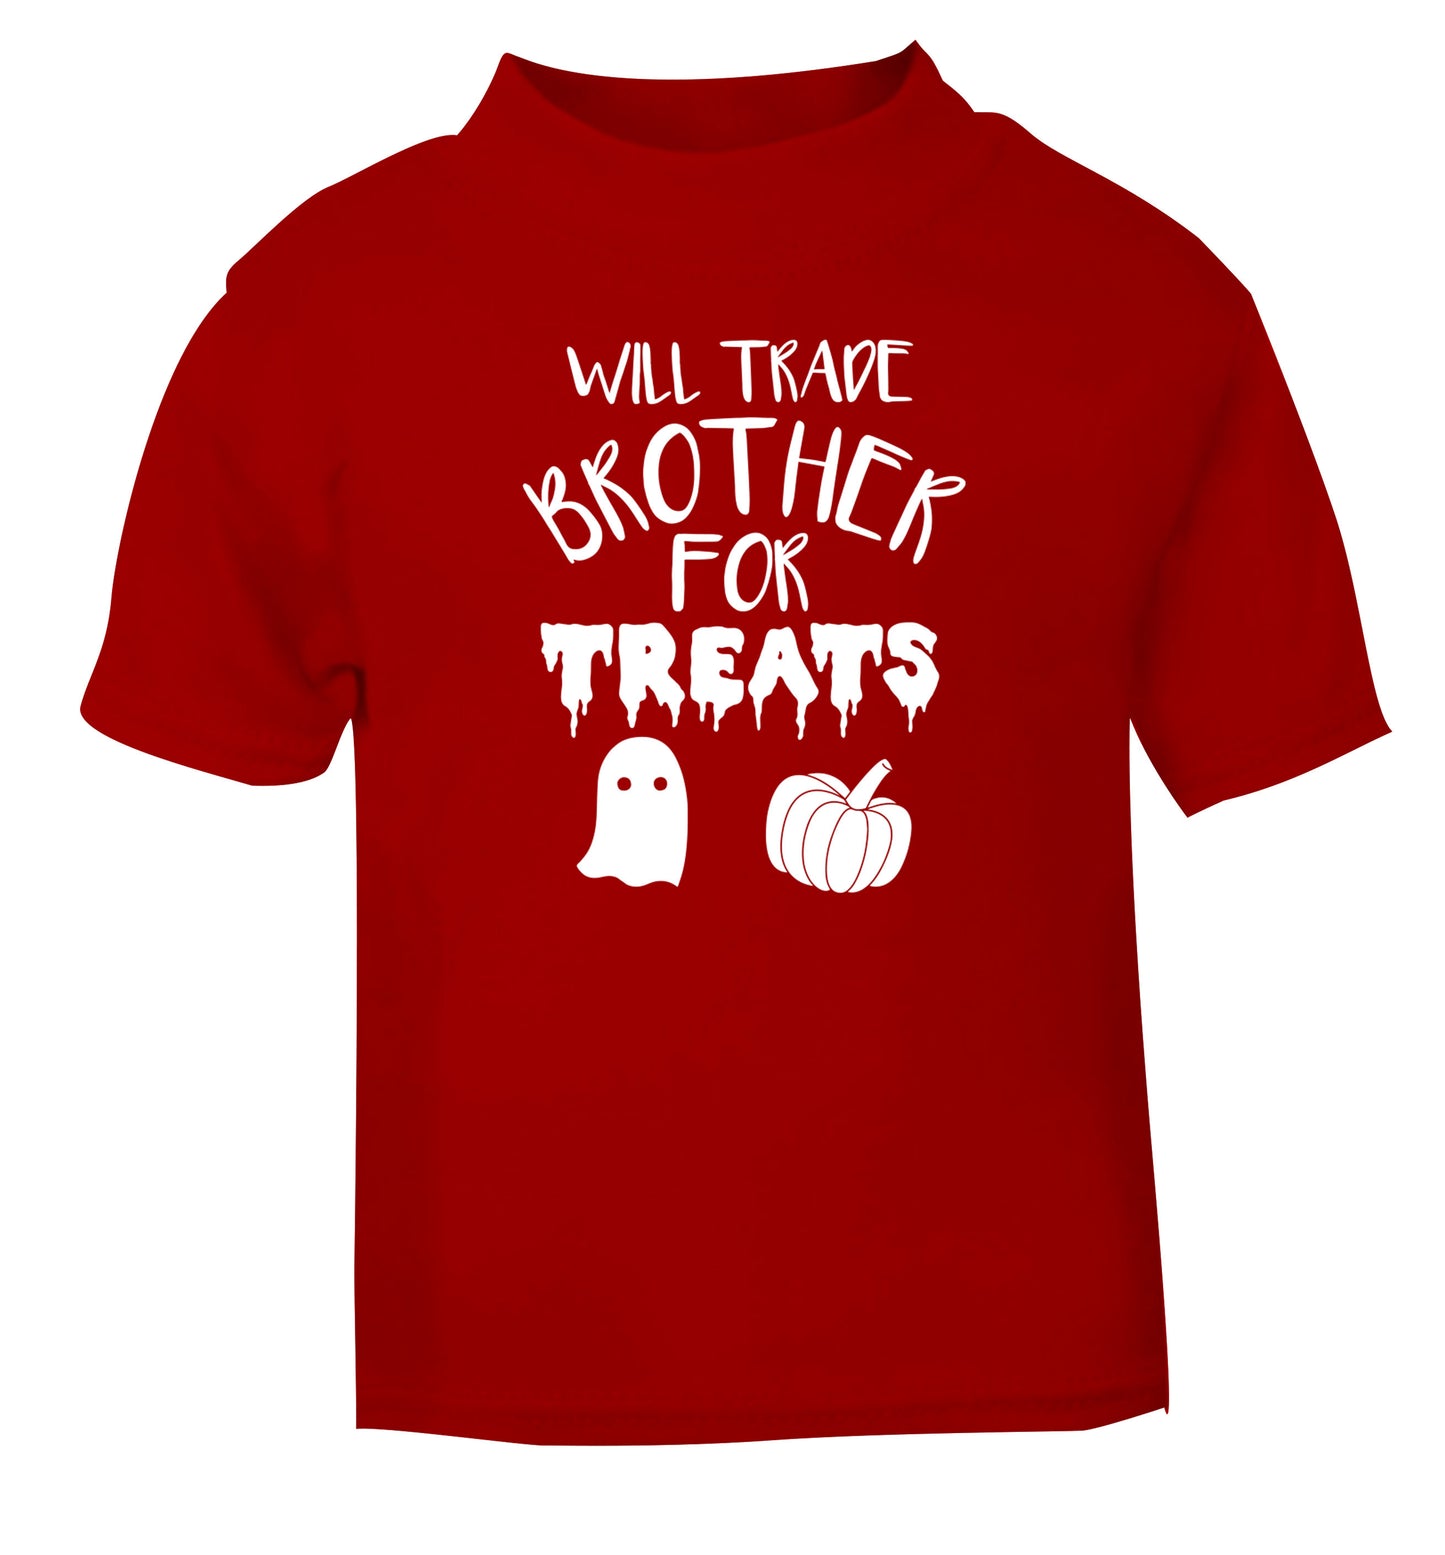 Will trade brother for treats red Baby Toddler Tshirt 2 Years